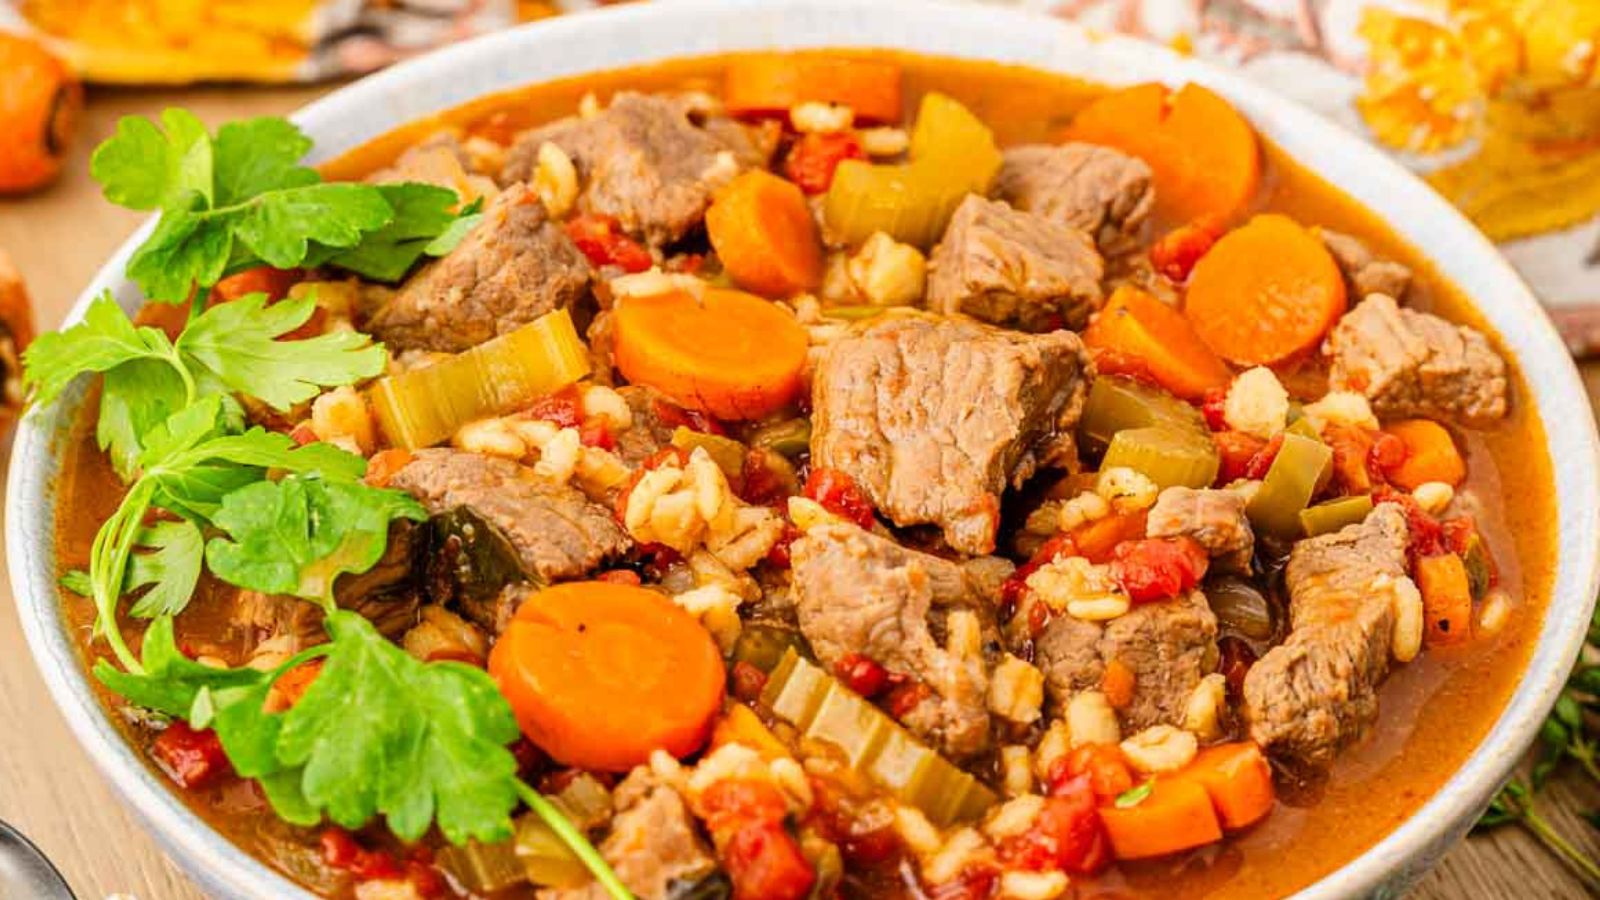 A bowl of barley stew with beef and vegetables.